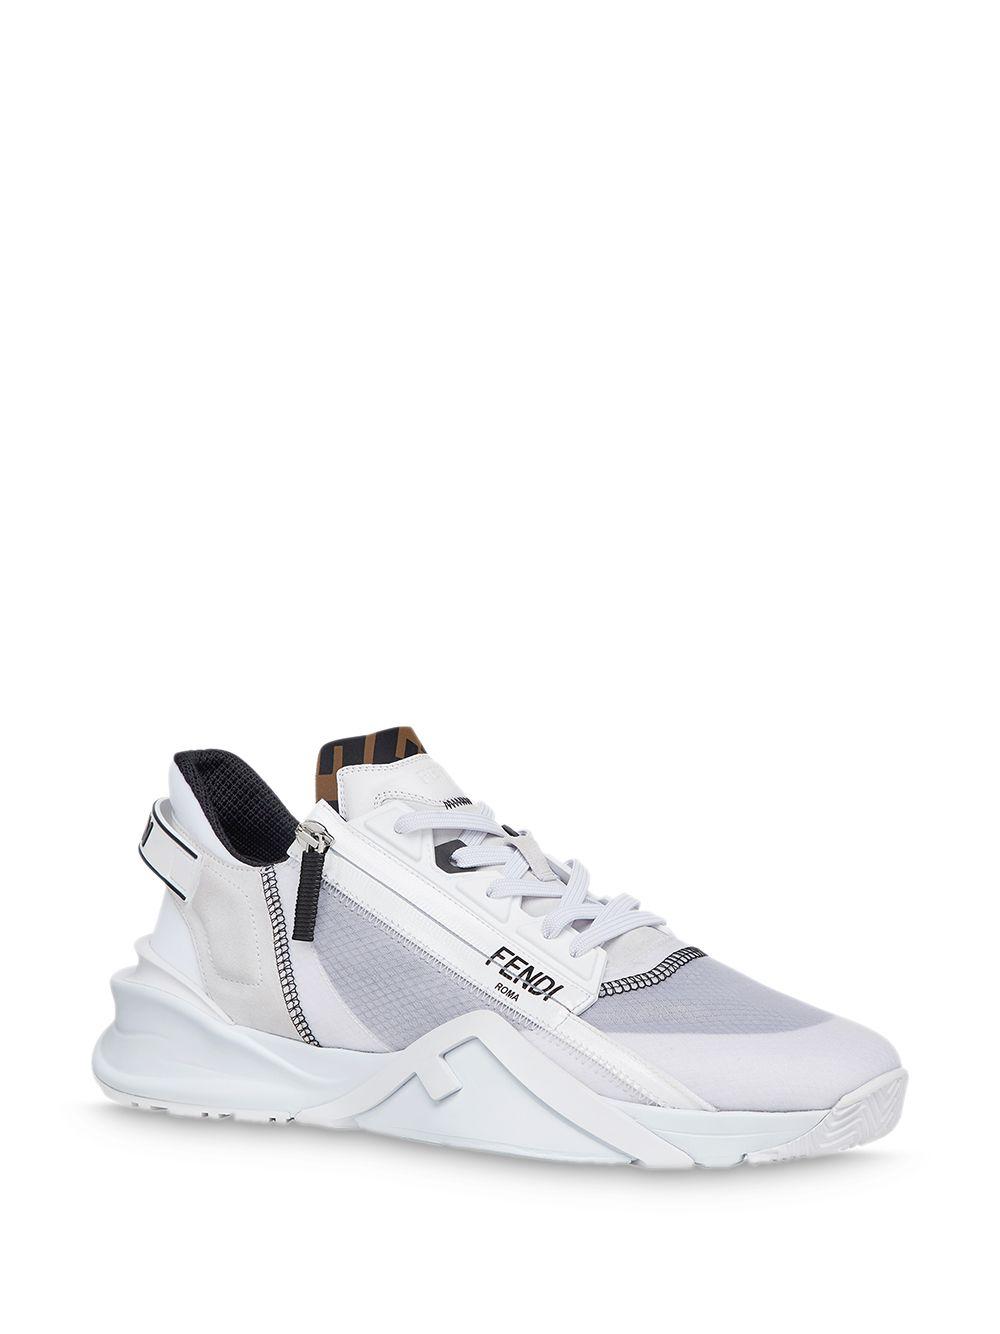 Fendi Leather Zip Running Style Sneakers in White for Men | Lyst